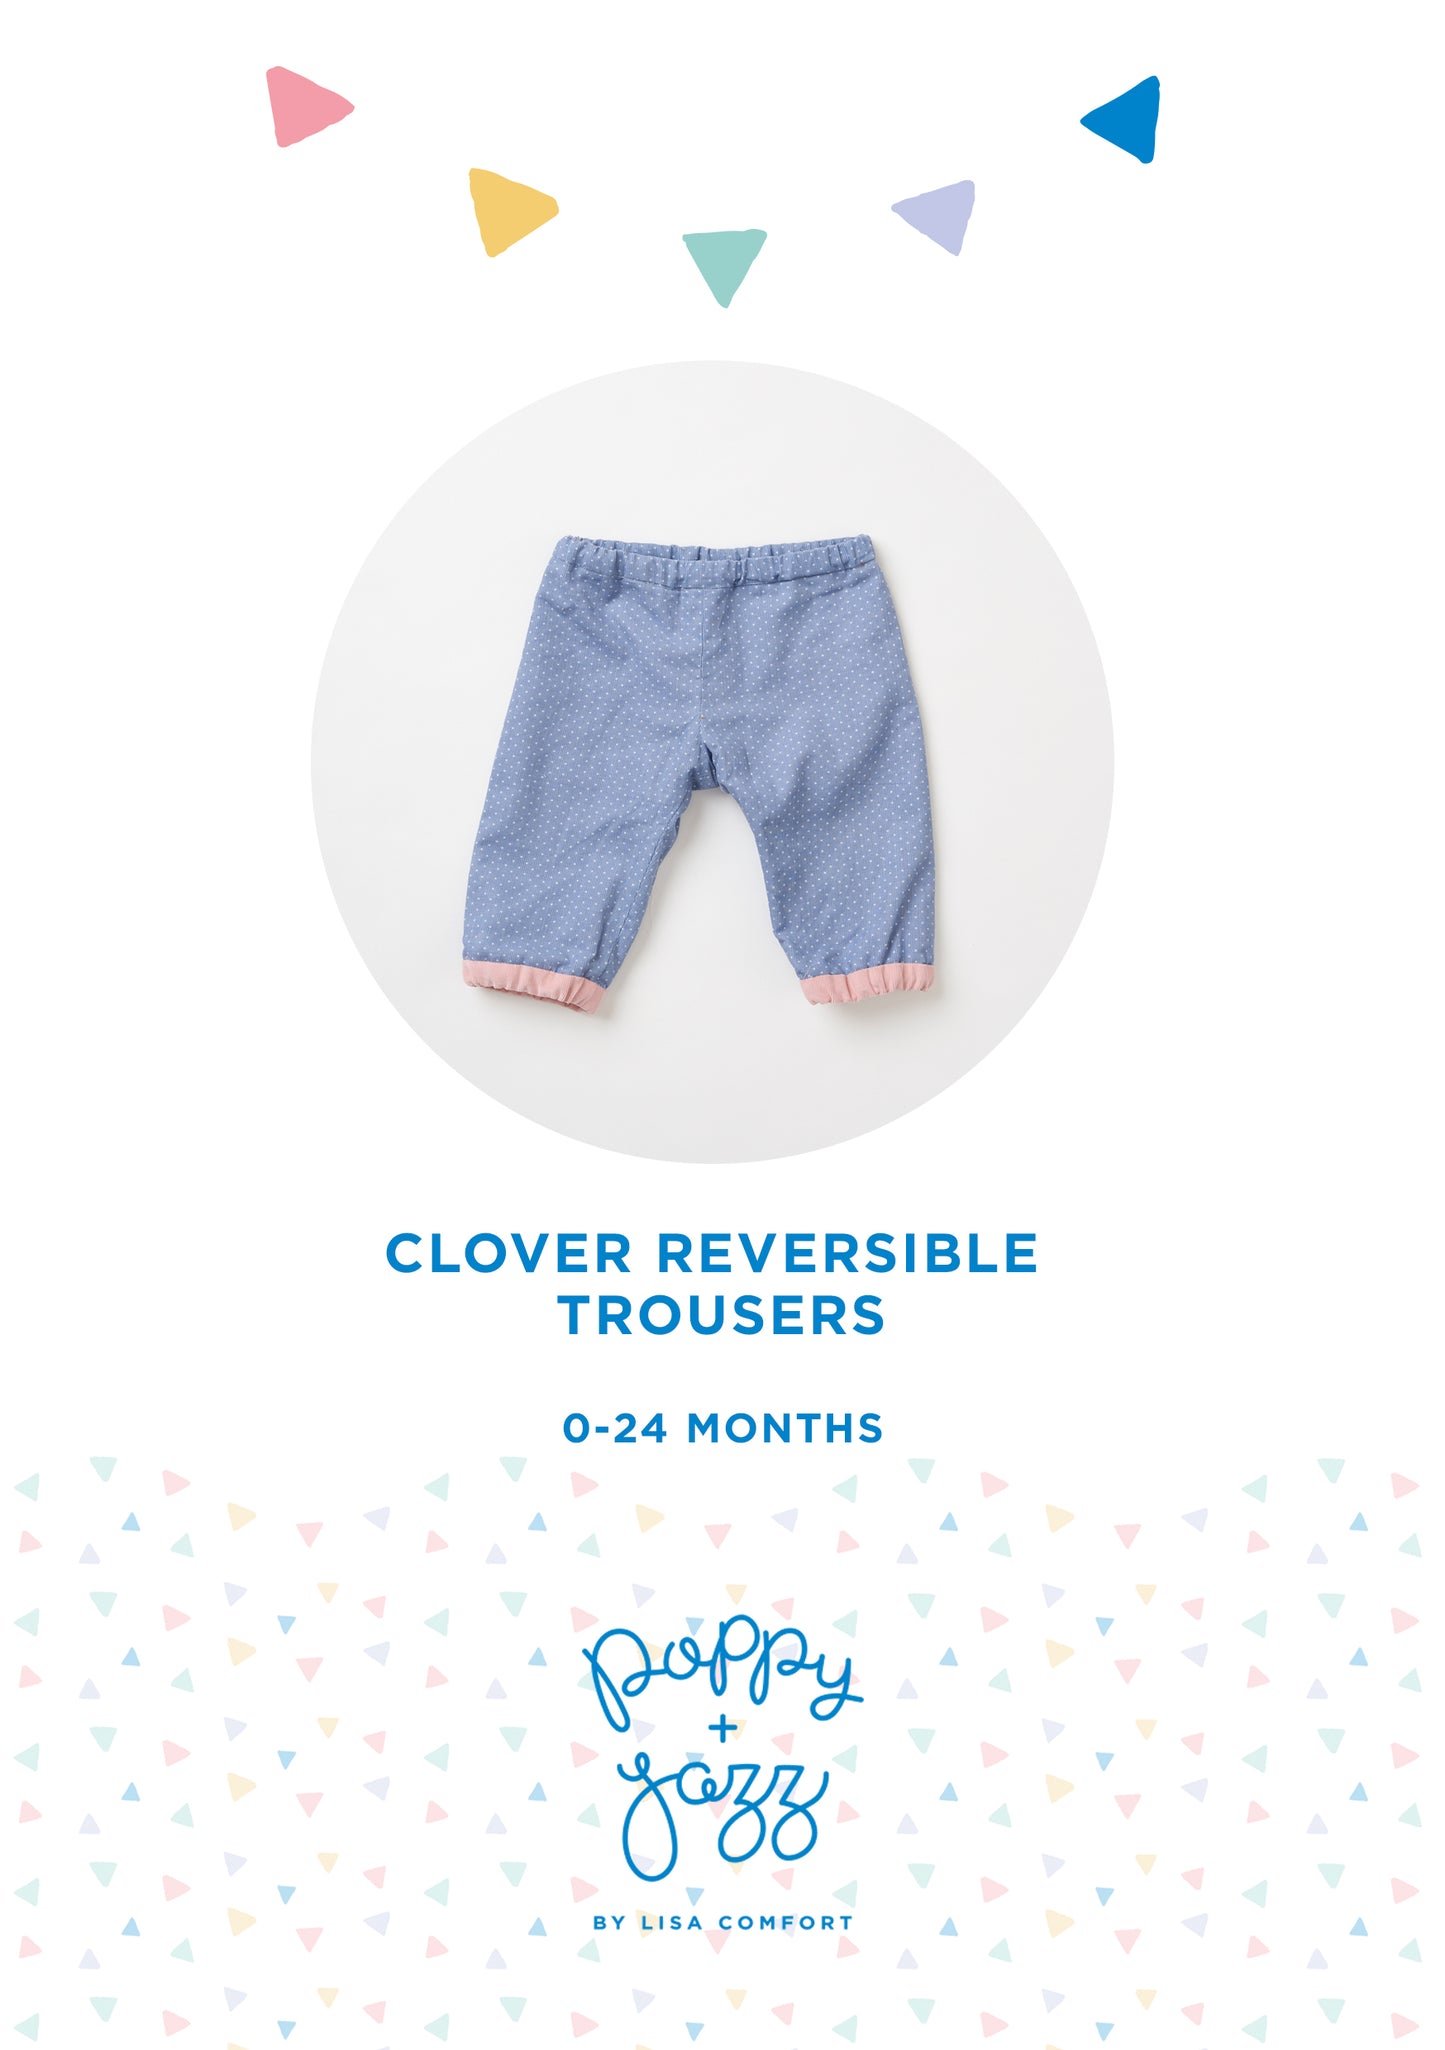 Clover Reversible Trousers PDF Sewing Pattern